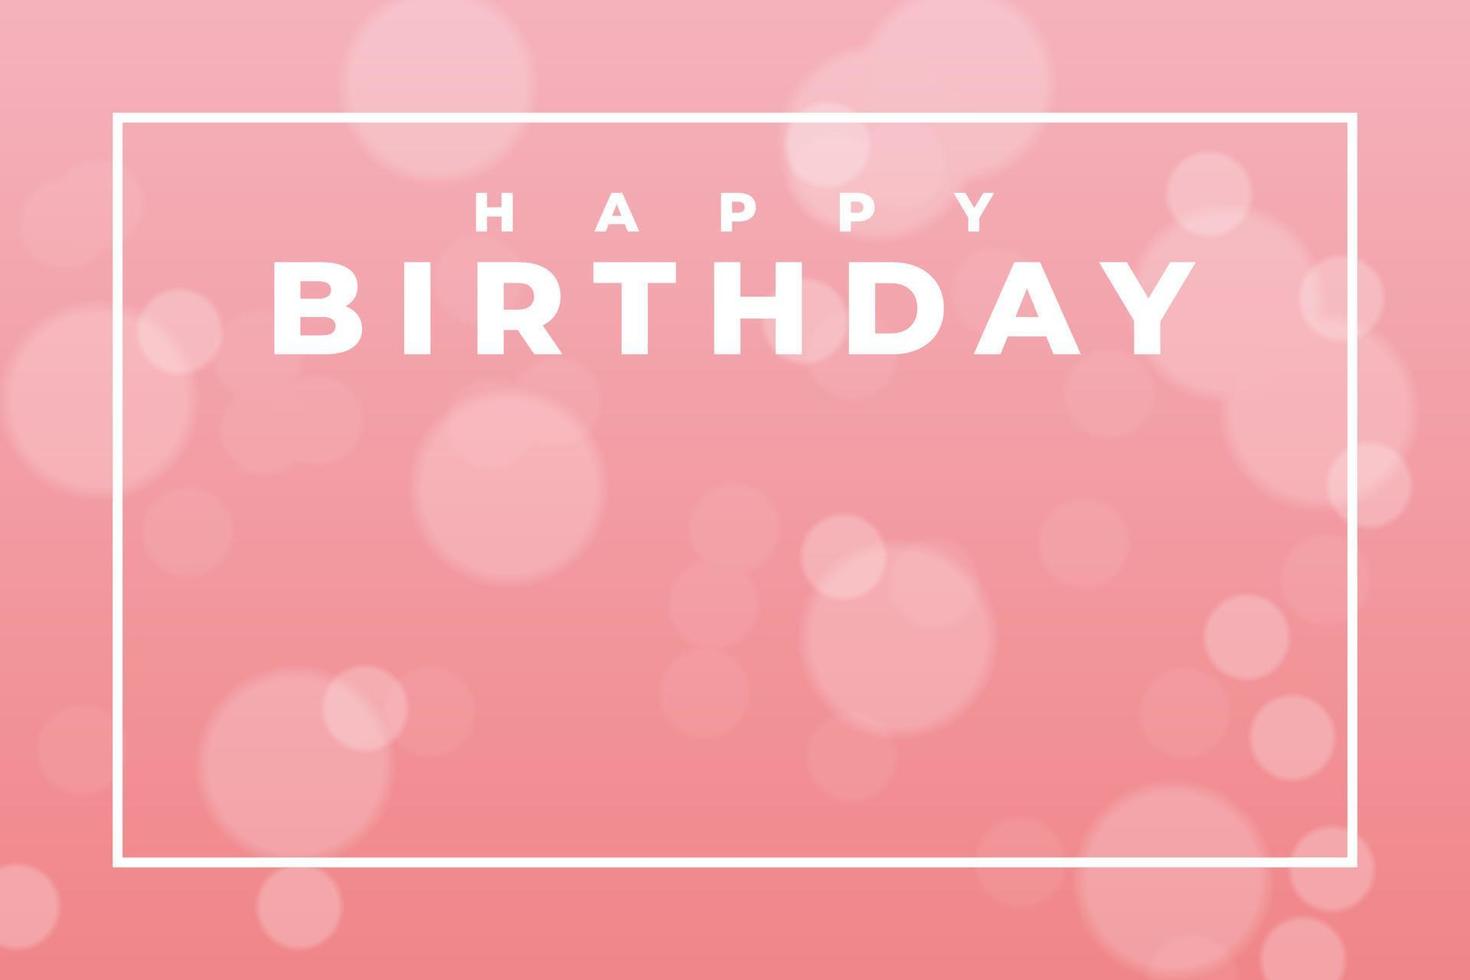 Happy birthday banner. Birthday party background design with confetti on blurry pink background vector